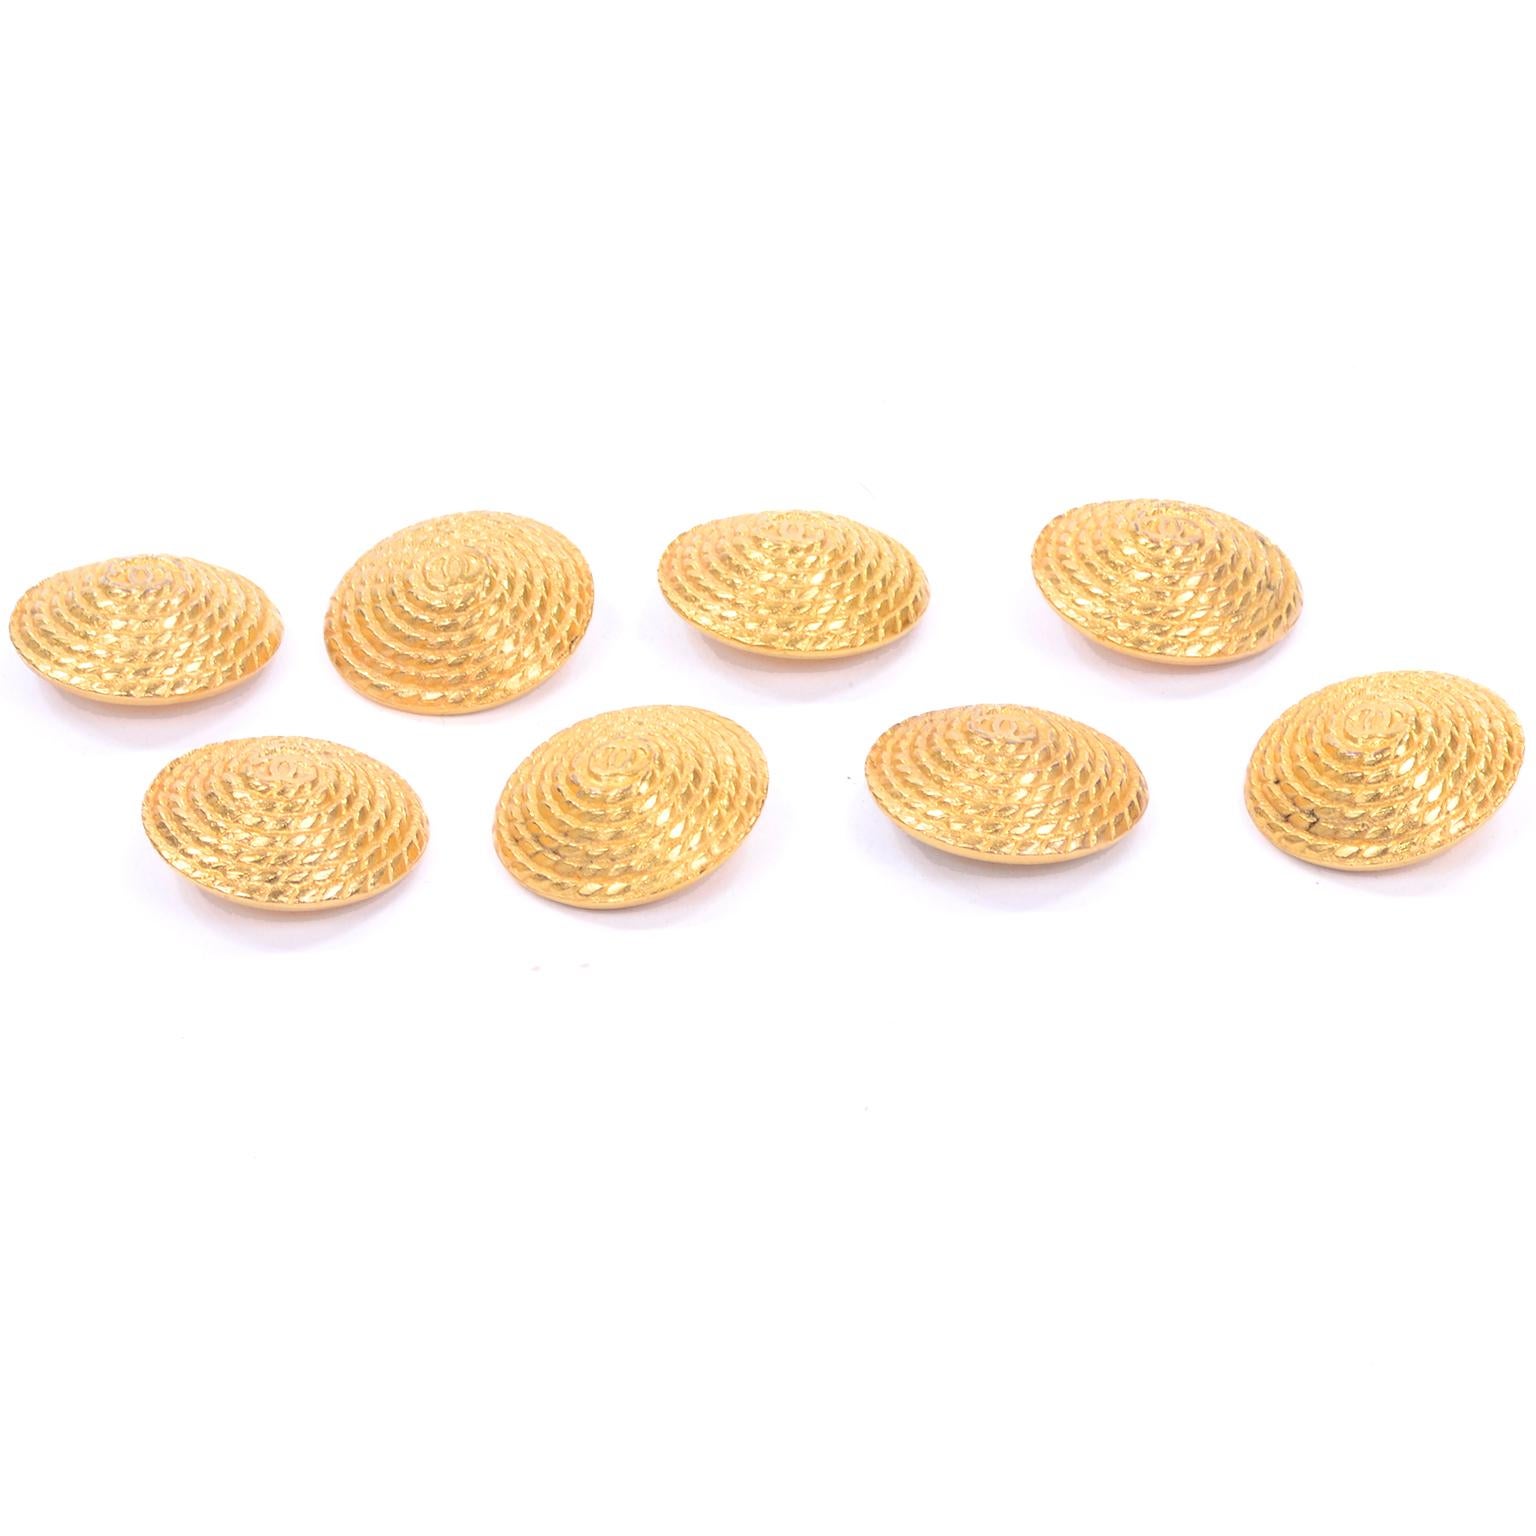 8 Large Vintage Chanel Buttons in Gold W CC Monogram in twisted rope design 5